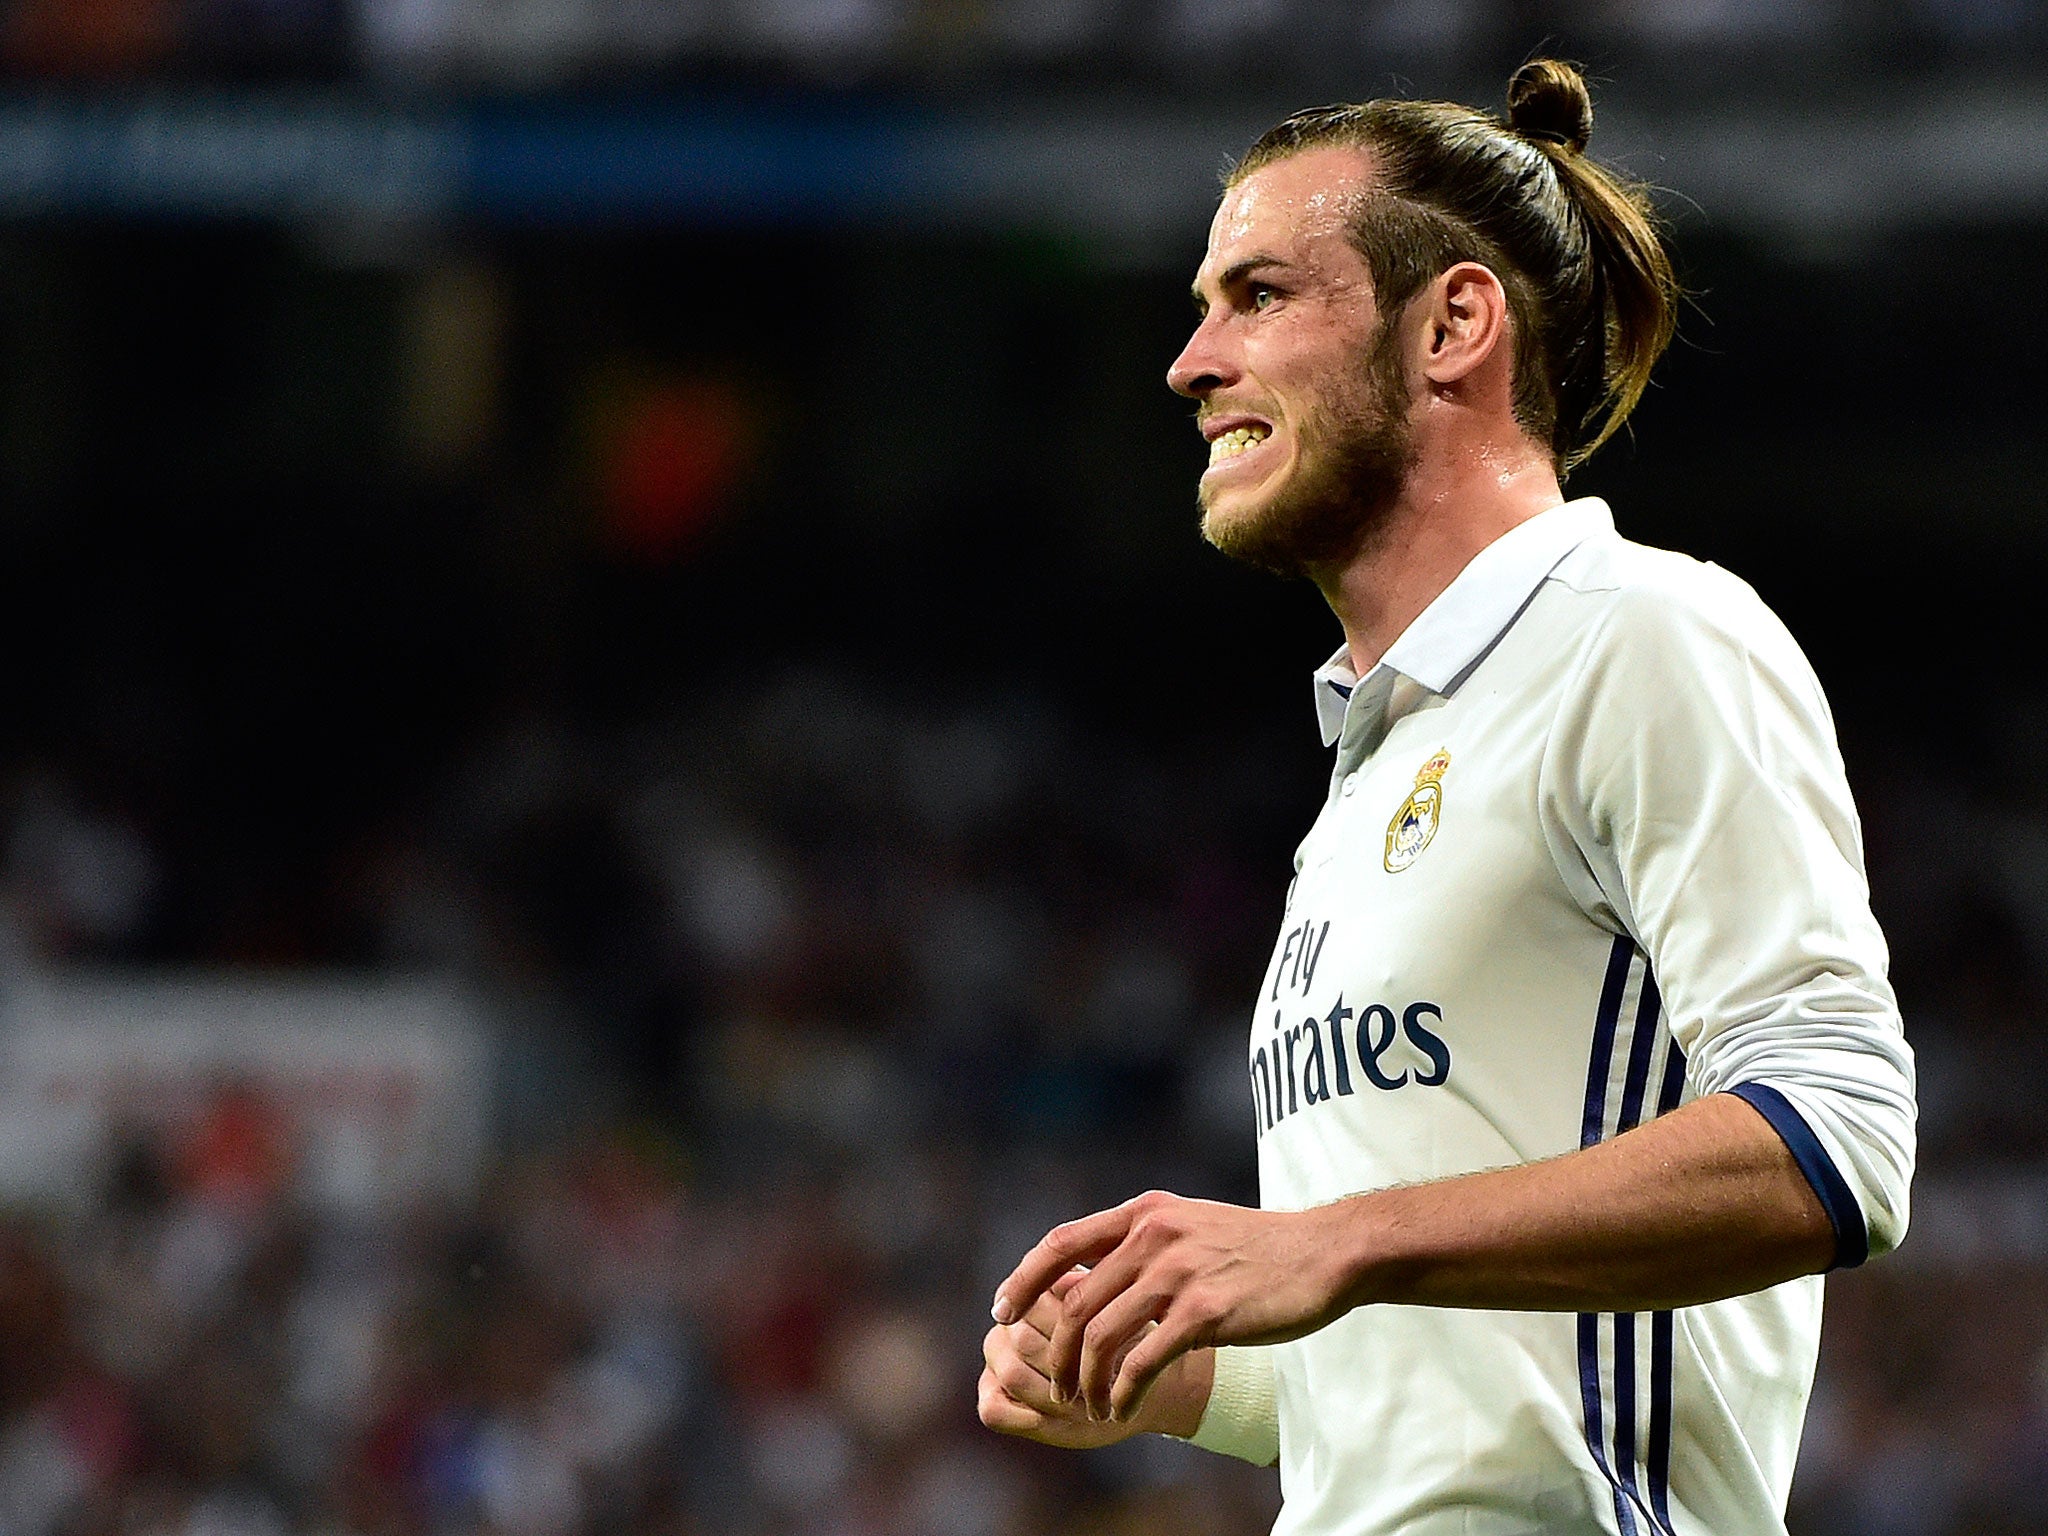 Gareth Bale admitted ahead of Saturday's final he is not '100% fit'